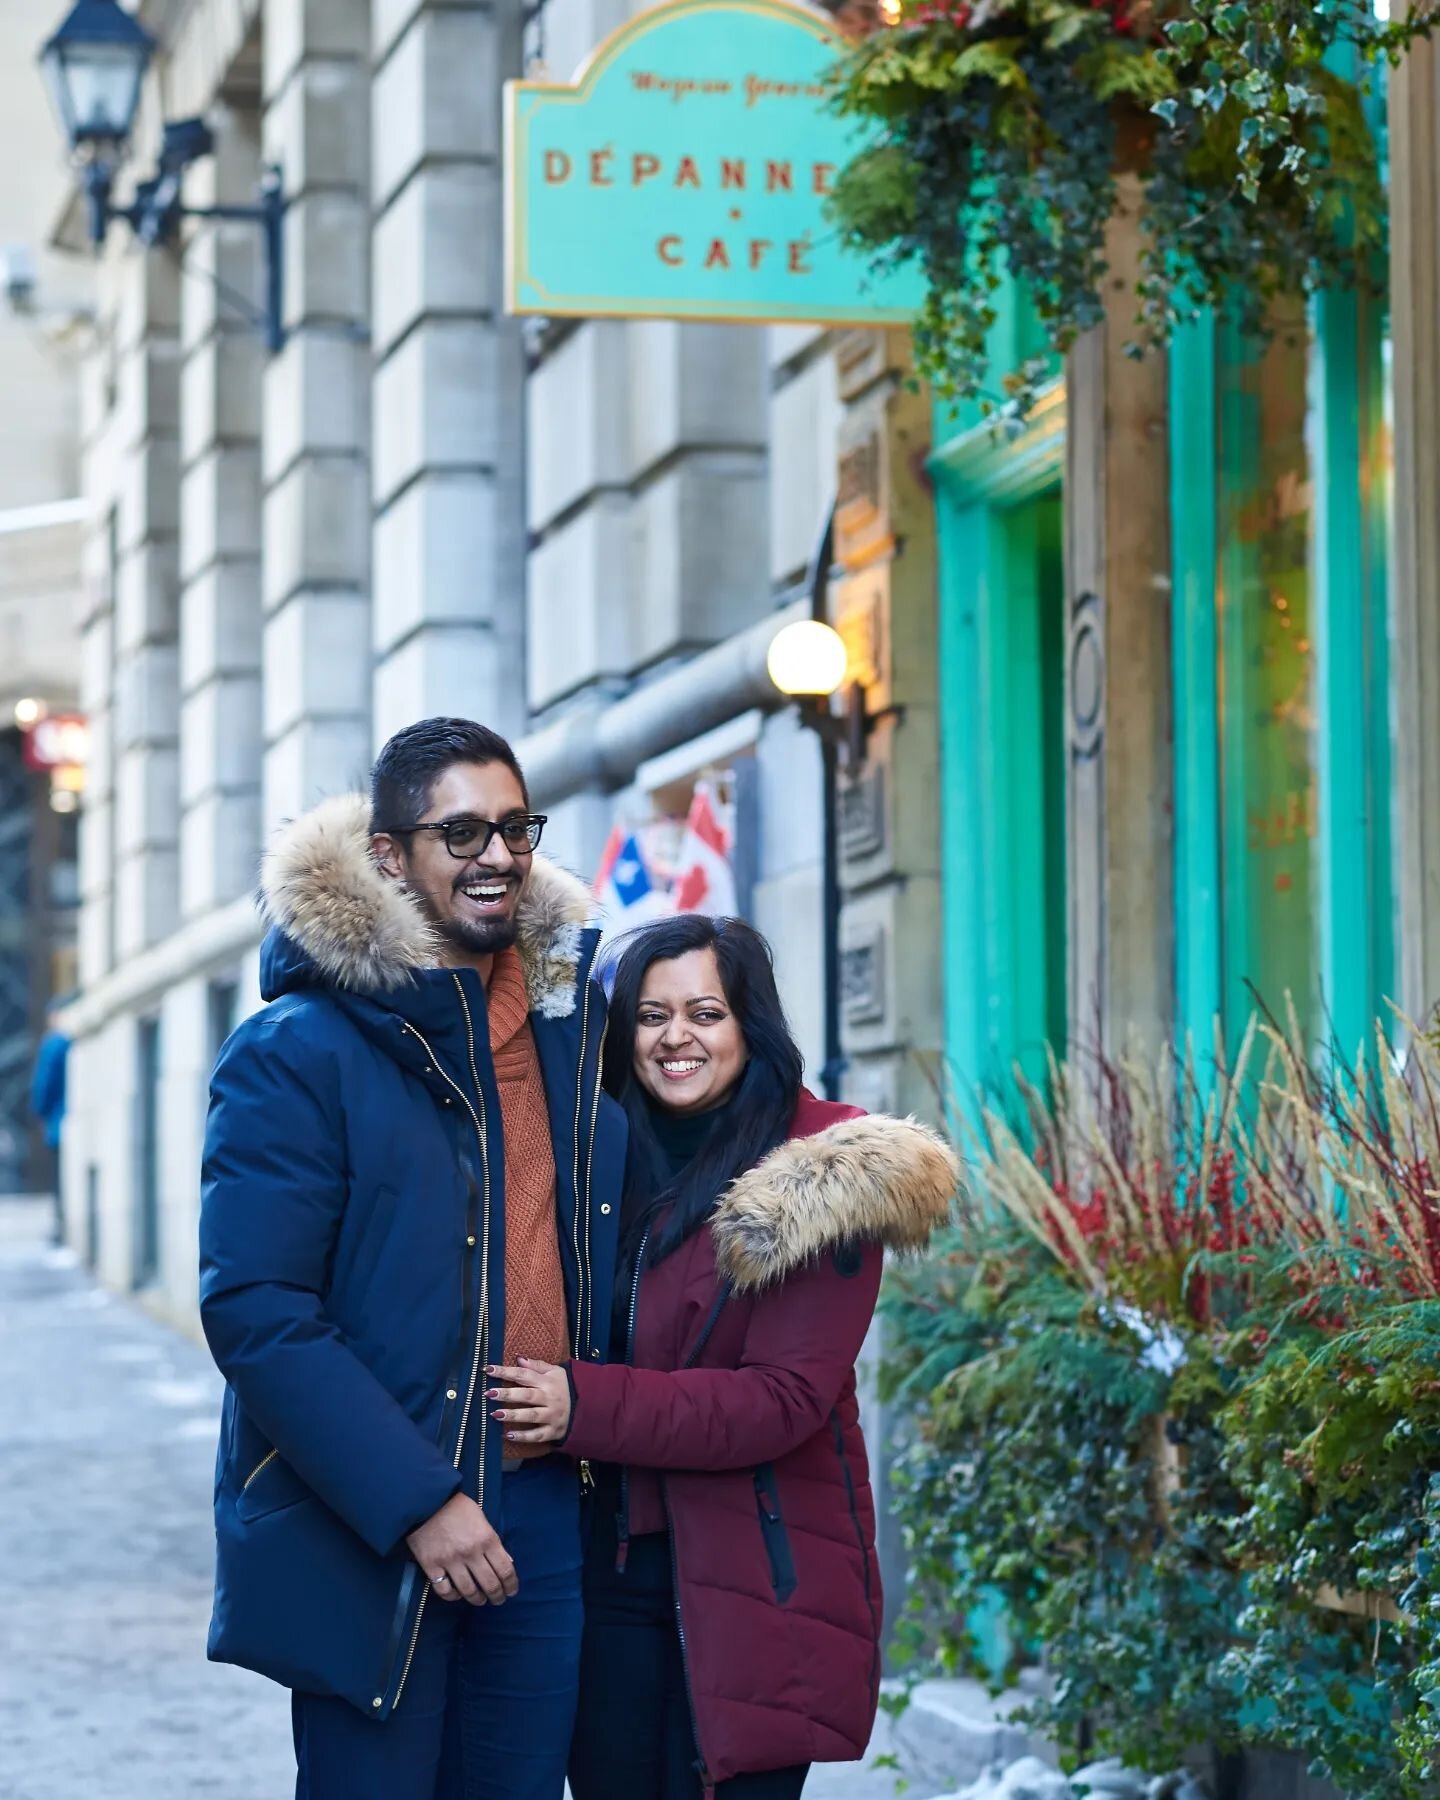 A fun winter photoshoot with my dear friends Aman &amp; Tanya.

For those who think of summer and fall seasons only for a couple photoshoot... let me show you some cute and fun photos from these two.  Whatever weather it is,  with the right mindset a